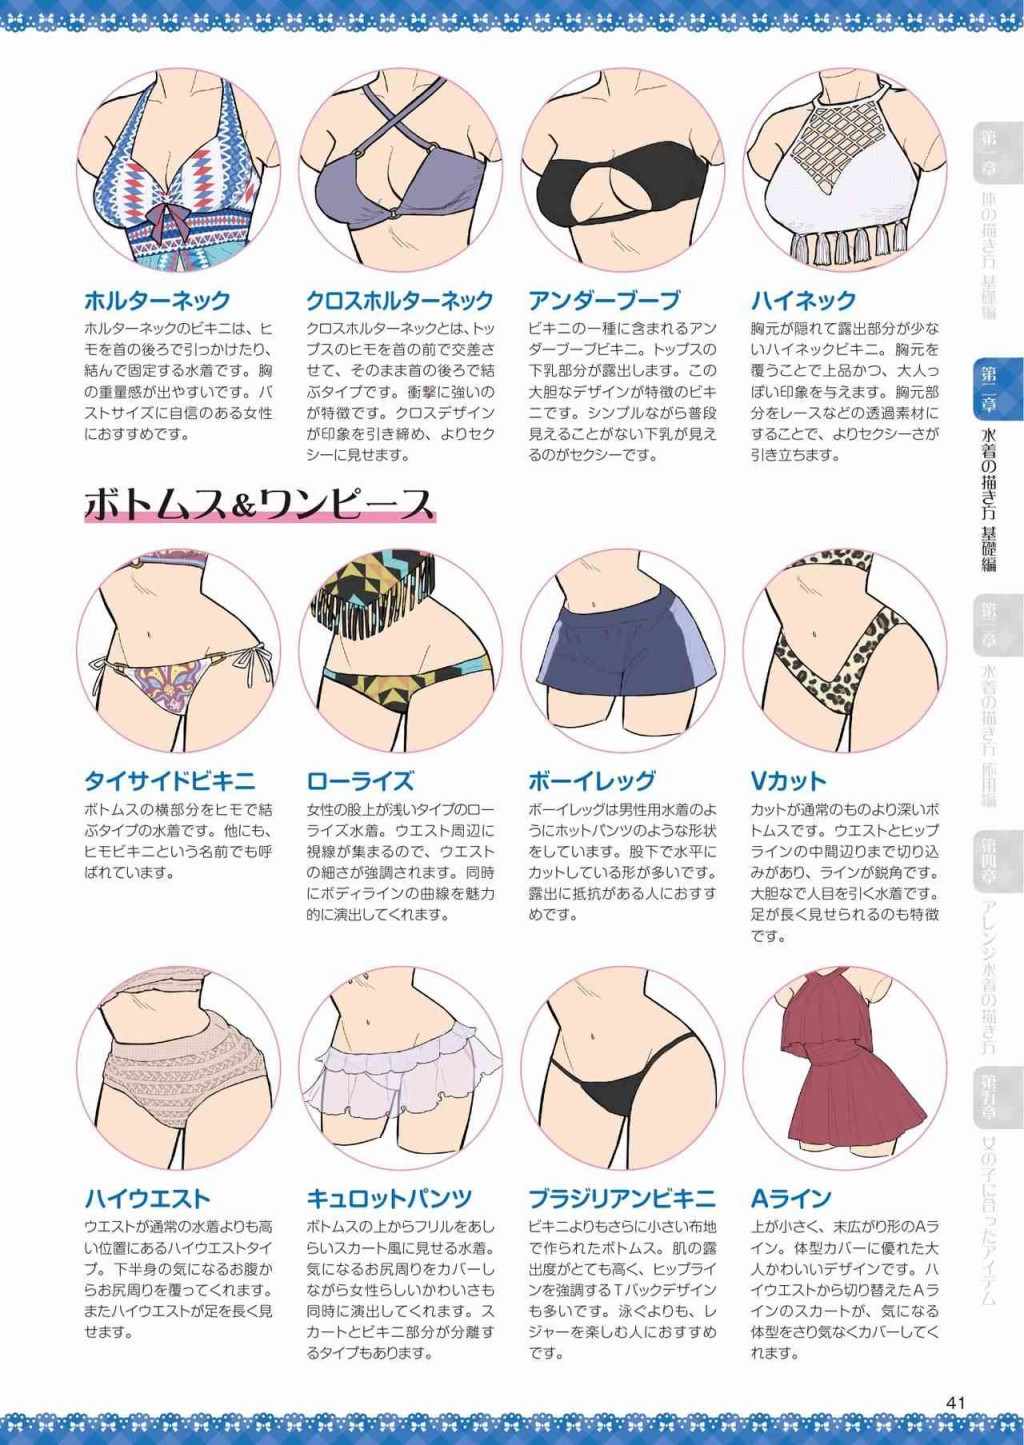 《How to draw swimsuits》漫画 短篇